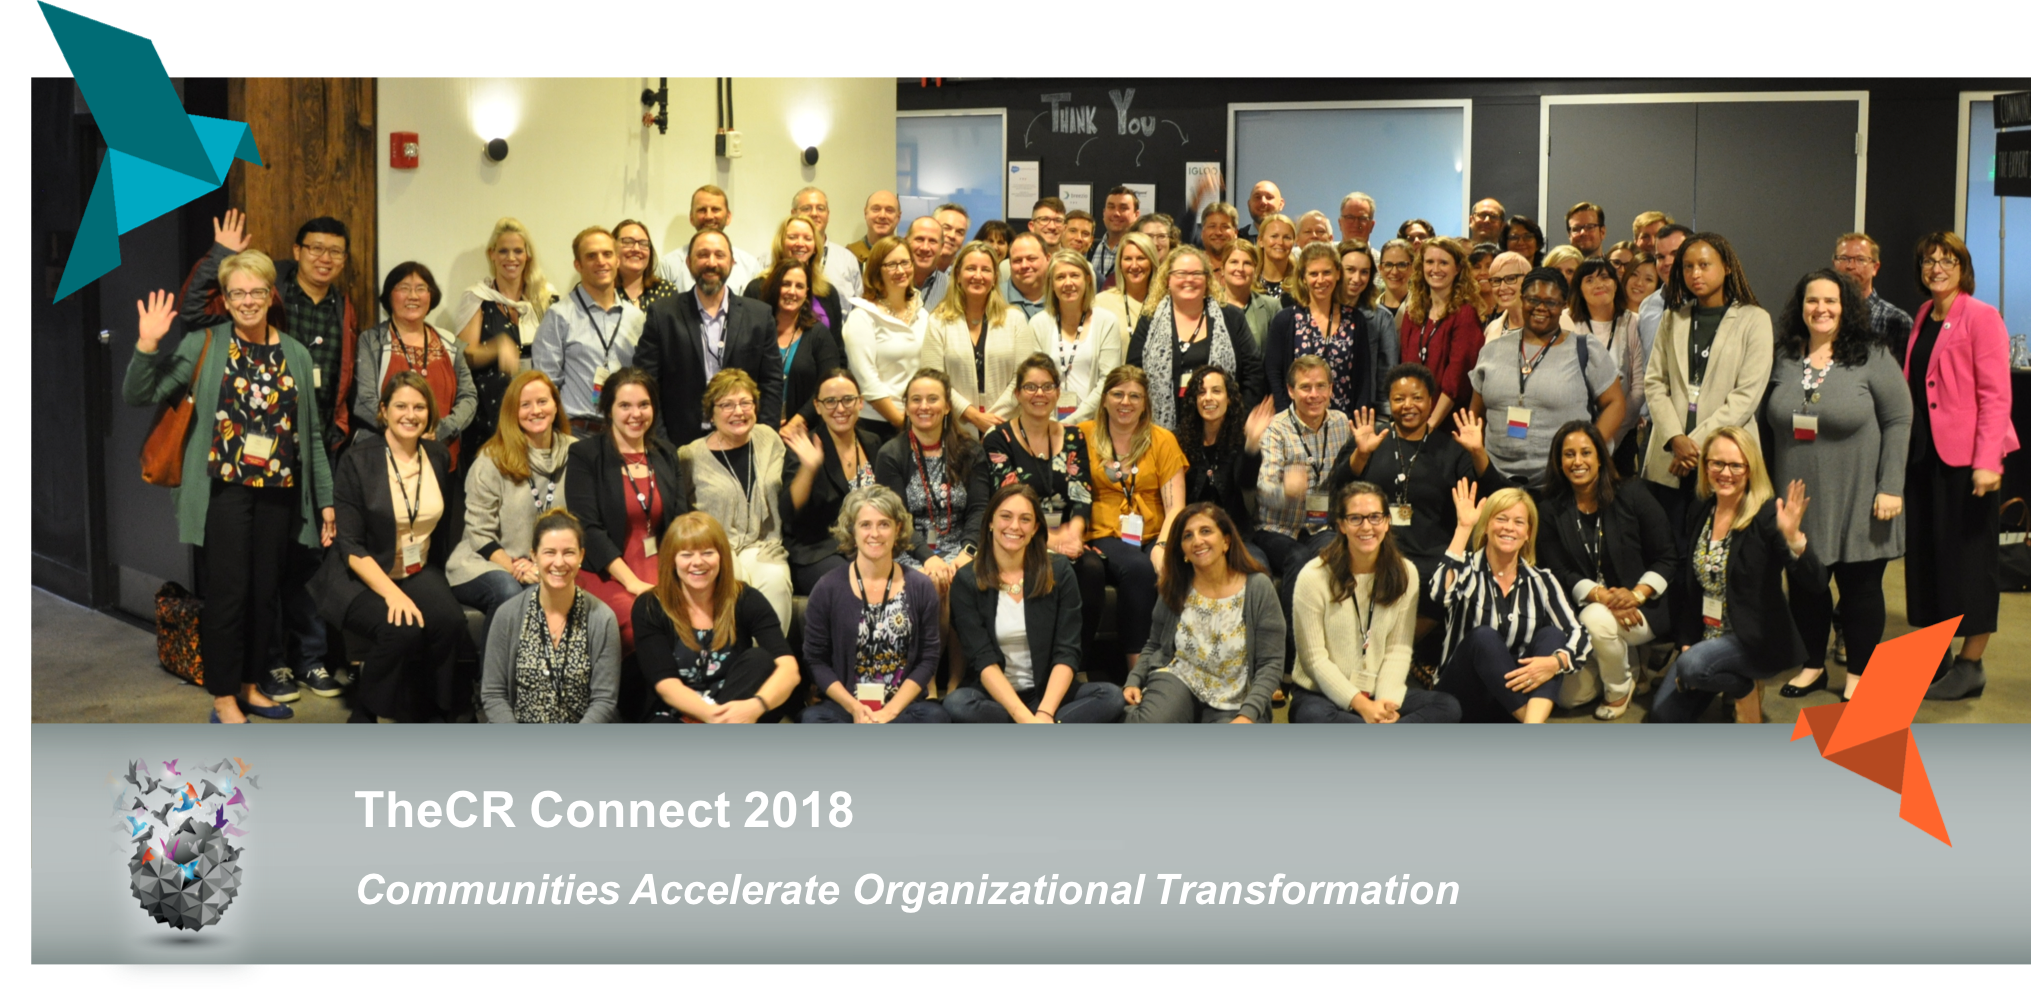 TheCR Connect 2018 Picture